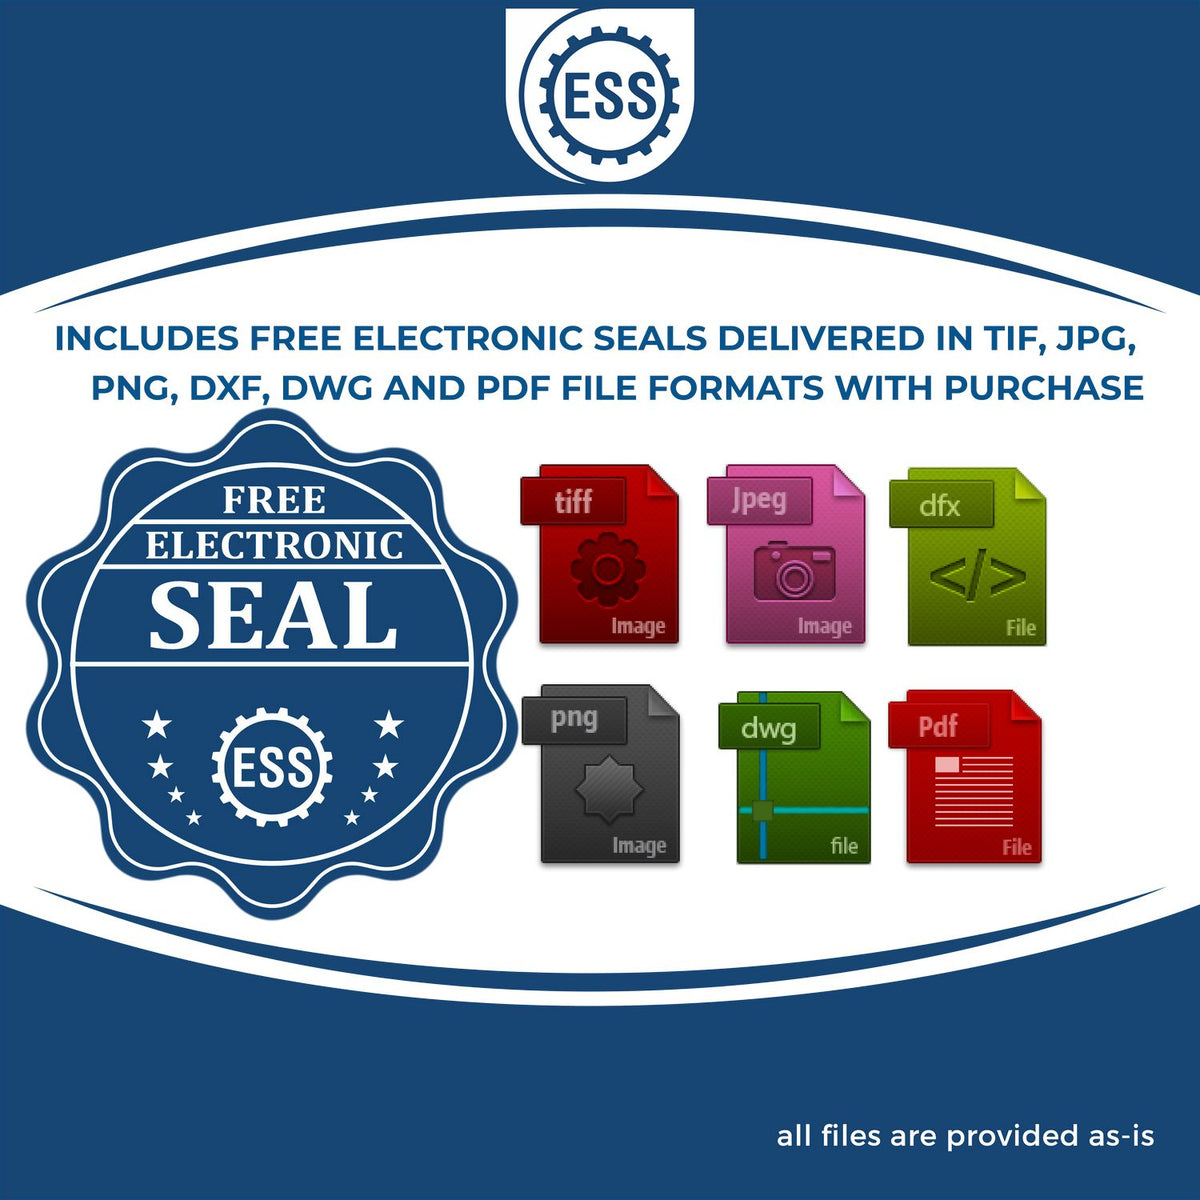 An infographic for the free electronic seal for the Self-Inking Montana Landscape Architect Stamp illustrating the different file type icons such as DXF, DWG, TIF, JPG and PNG.